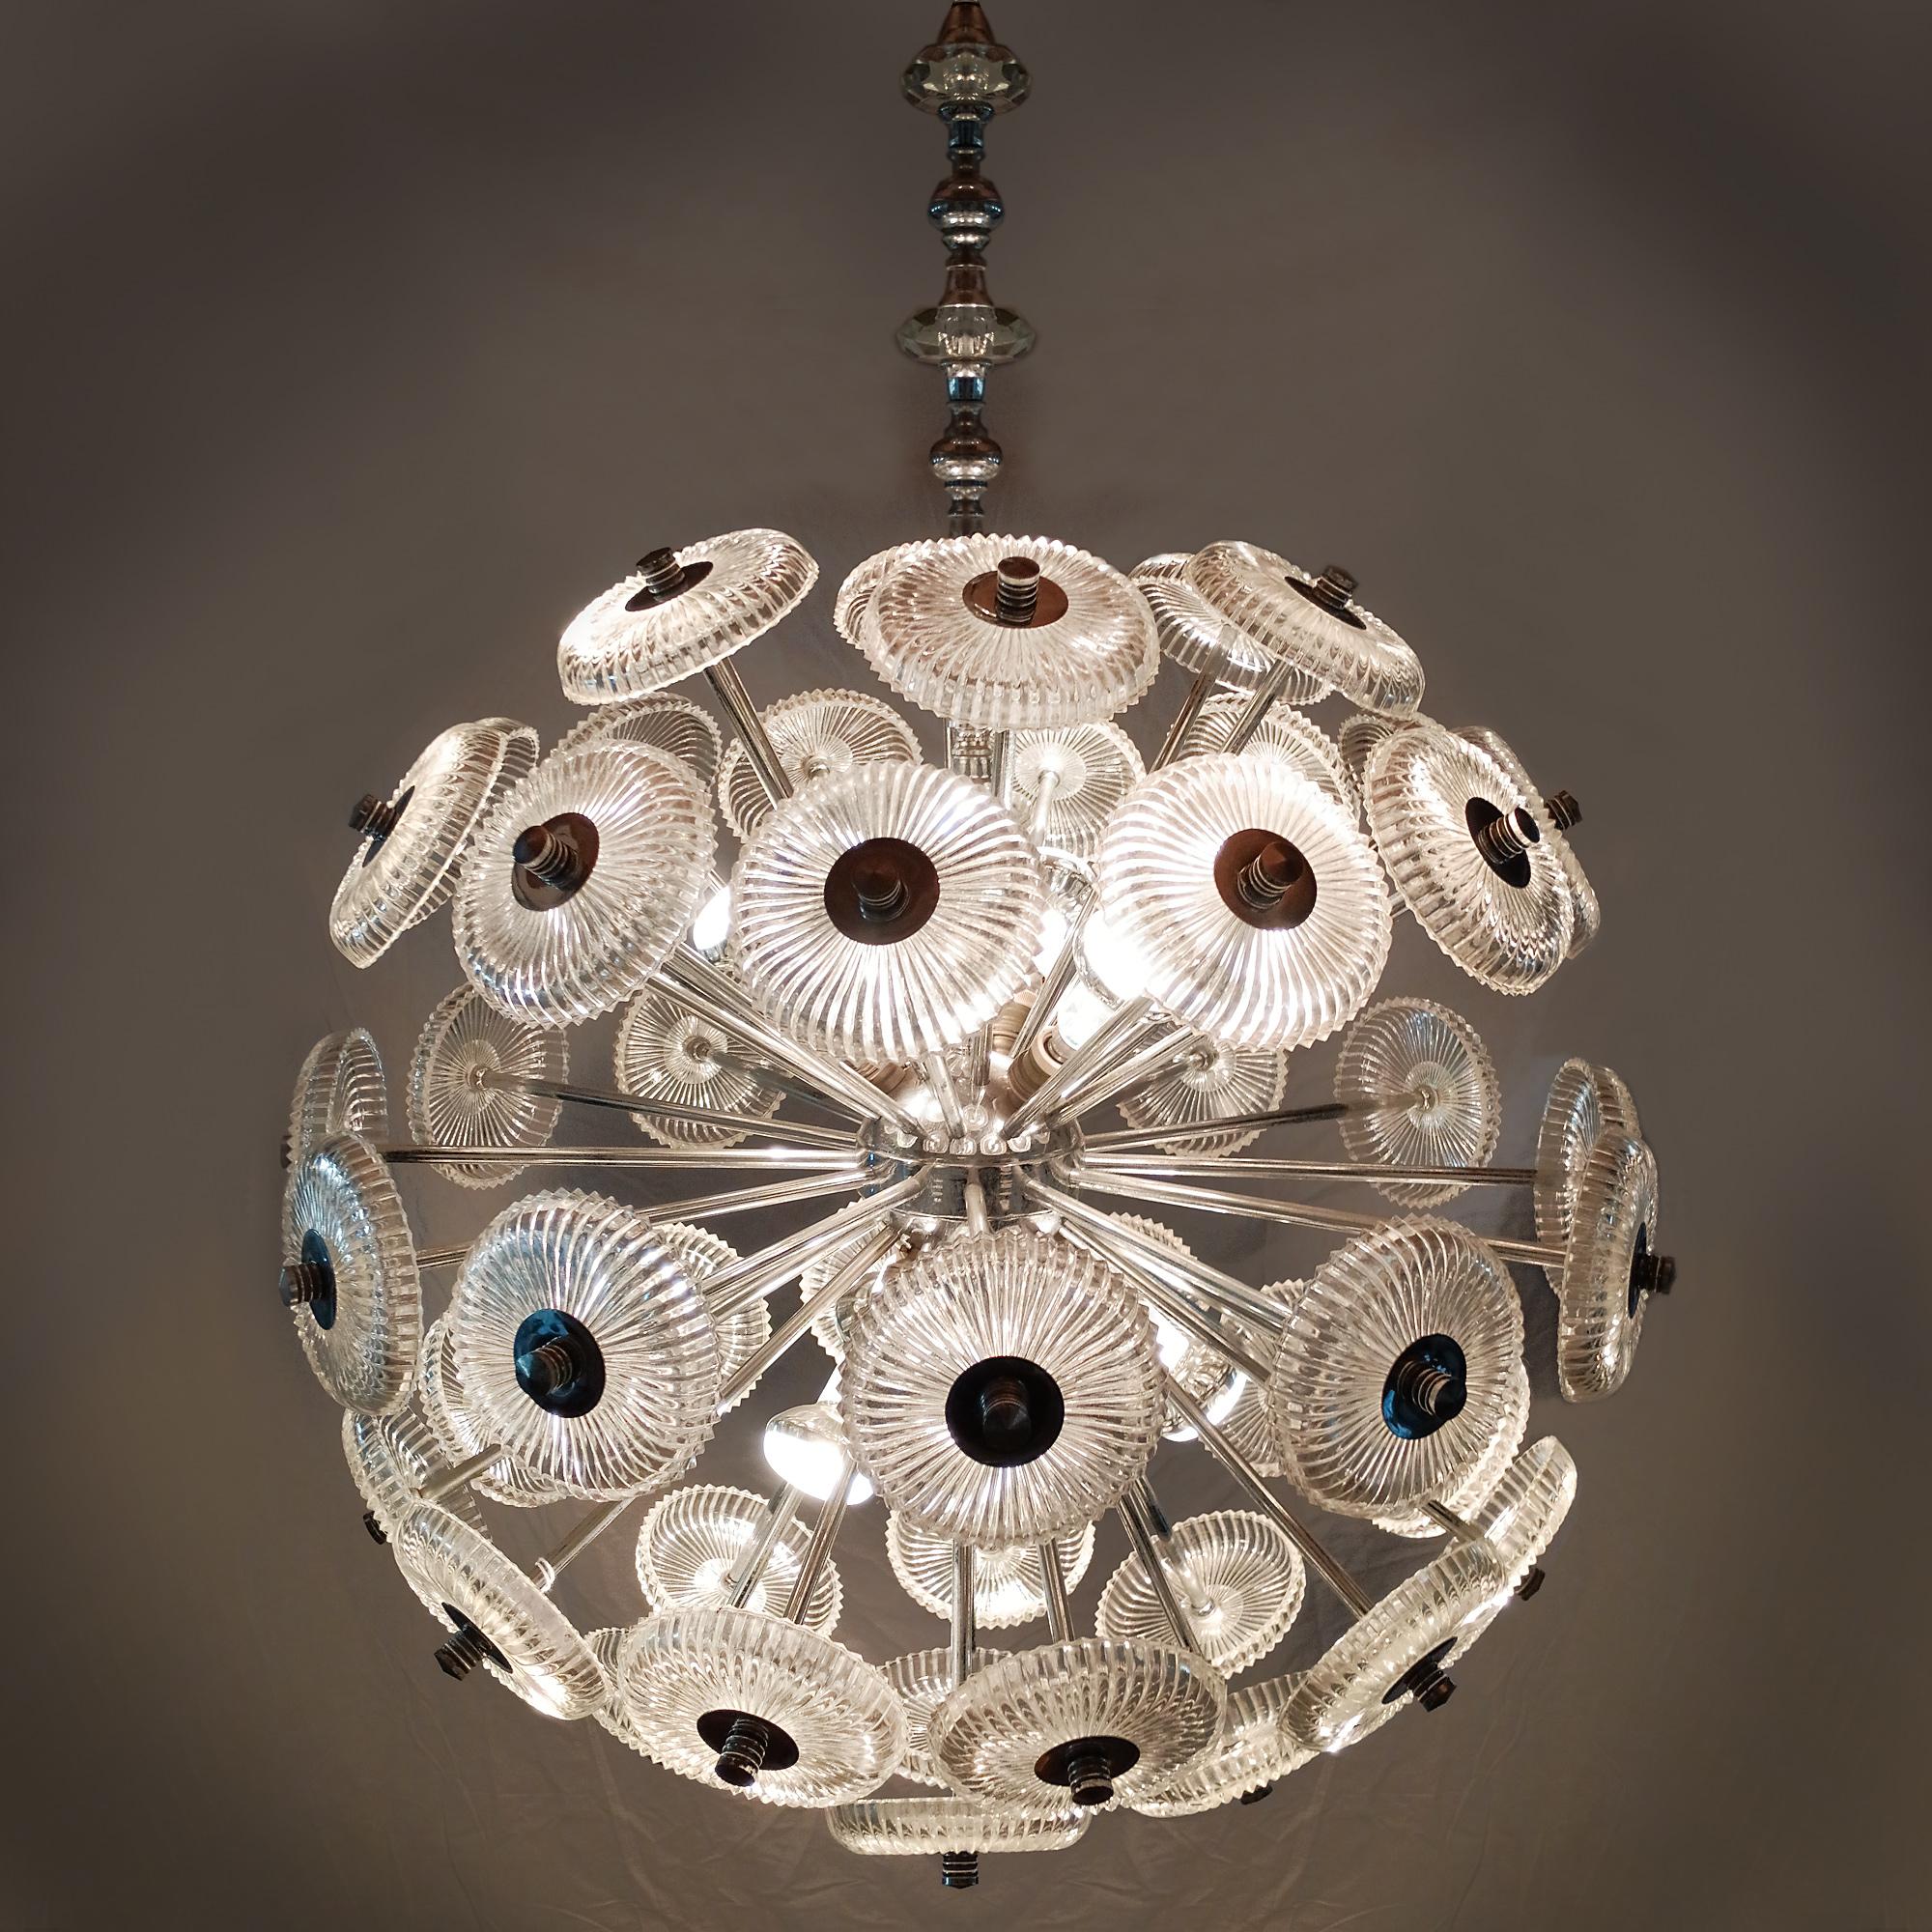 Sputnik chandelier in nickel-plated metal and pressed glass cups. Suspension rod decorated with cut glass cabochons. Six points of light.

Spain c.1950-60.